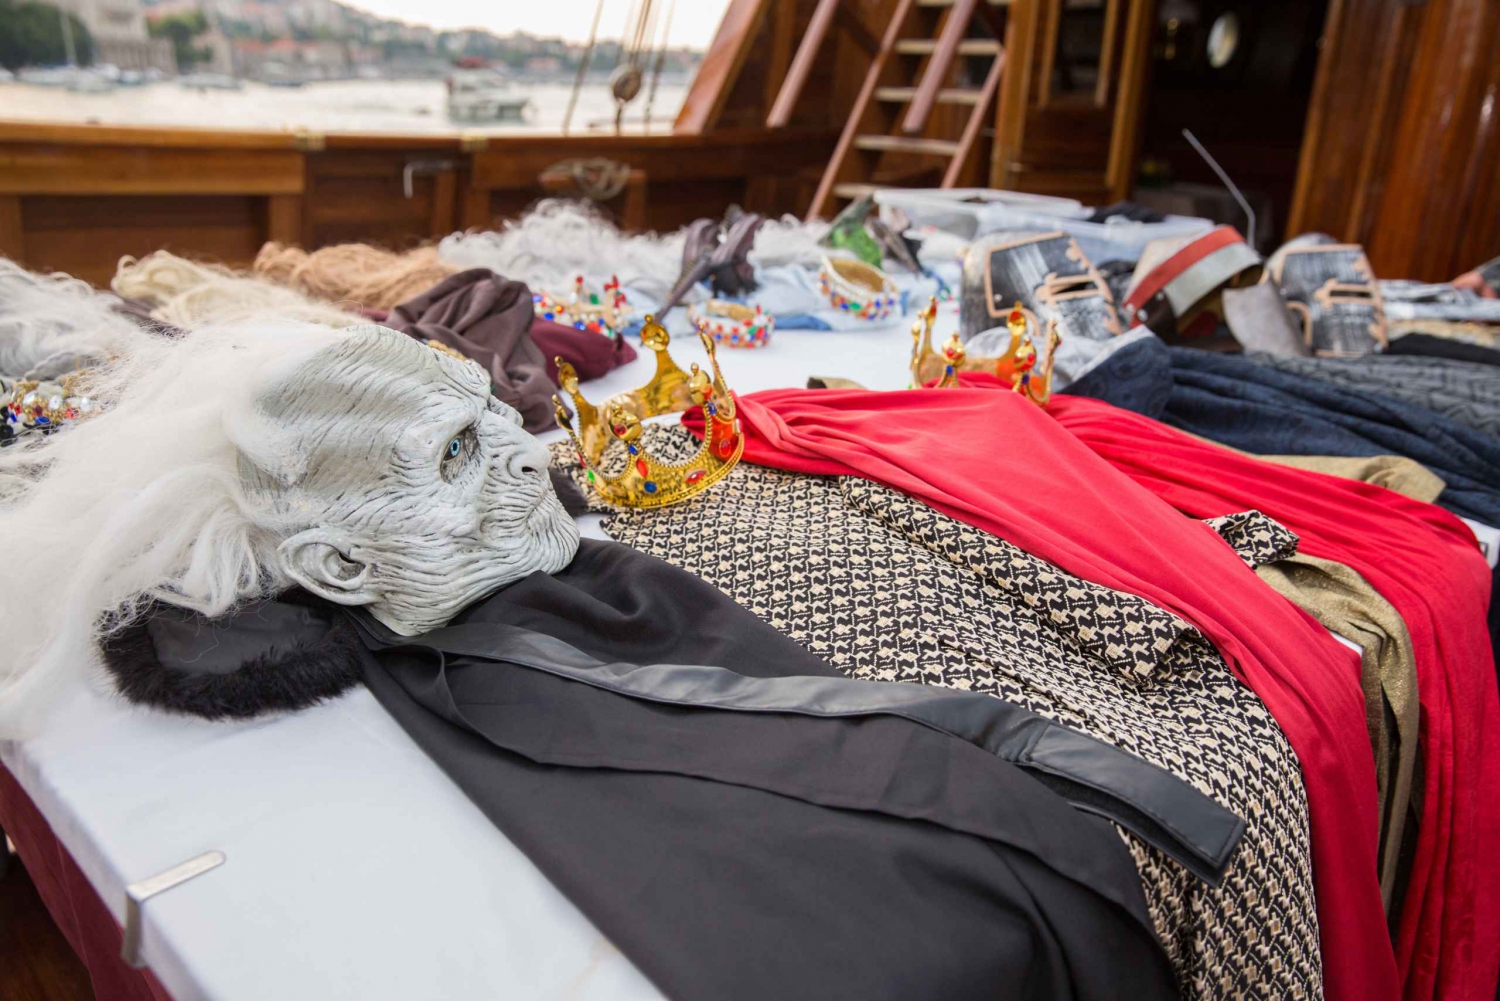 From Dubrovnik: 2-Hour Game of Thrones Tour & Cruise